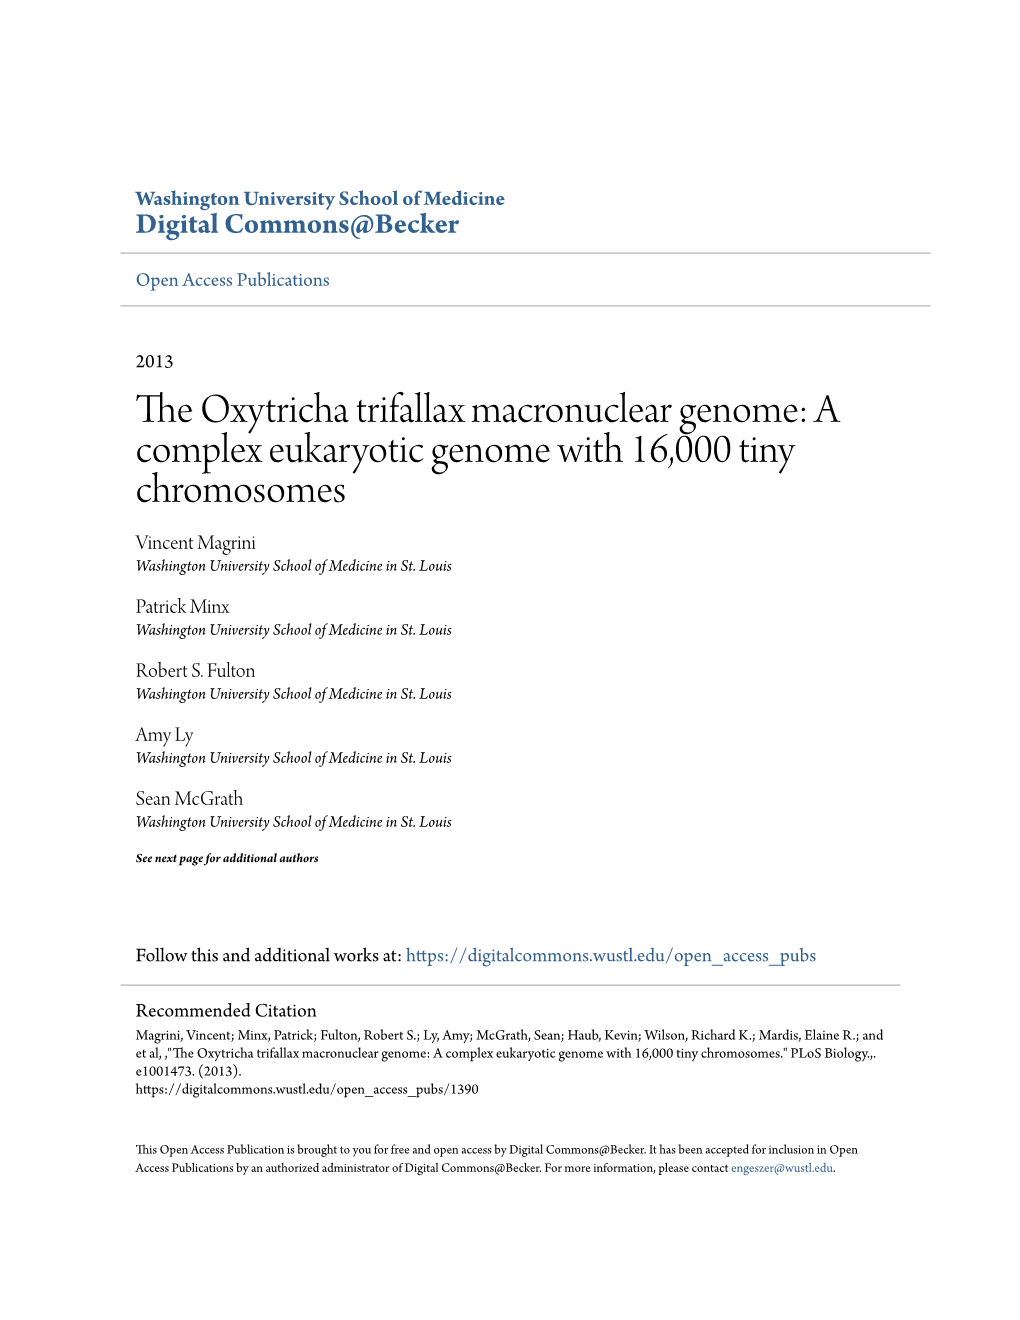 The Oxytricha Trifallax Macronuclear Genome: a Complex Eukaryotic Genome with 16,000 Tiny Chromosomes Vincent Magrini Washington University School of Medicine in St